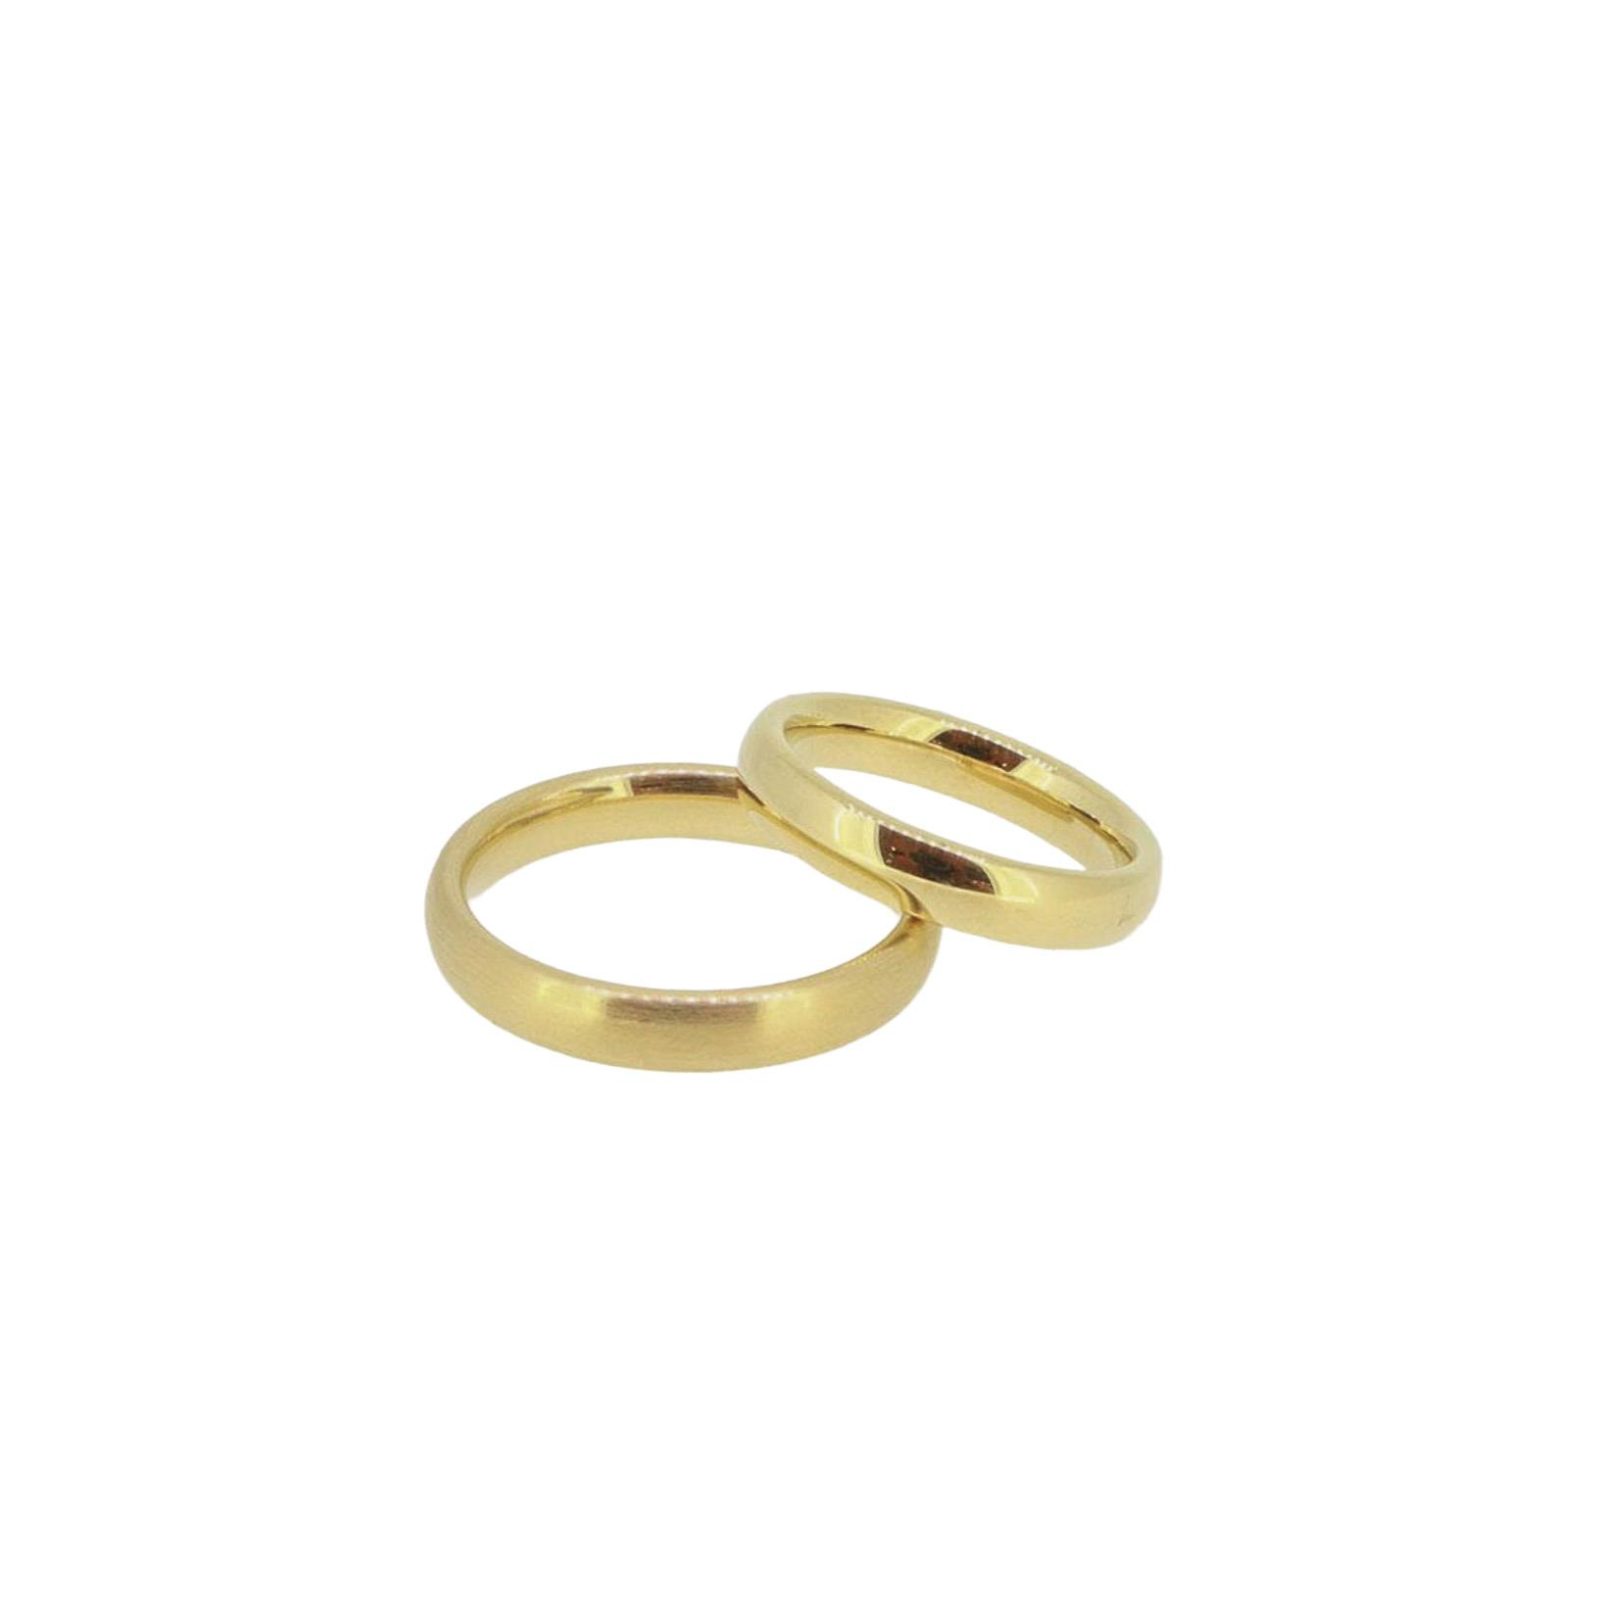 Trauring Meister Oval 18kt Gelbgold - Meister - 10.1868.140